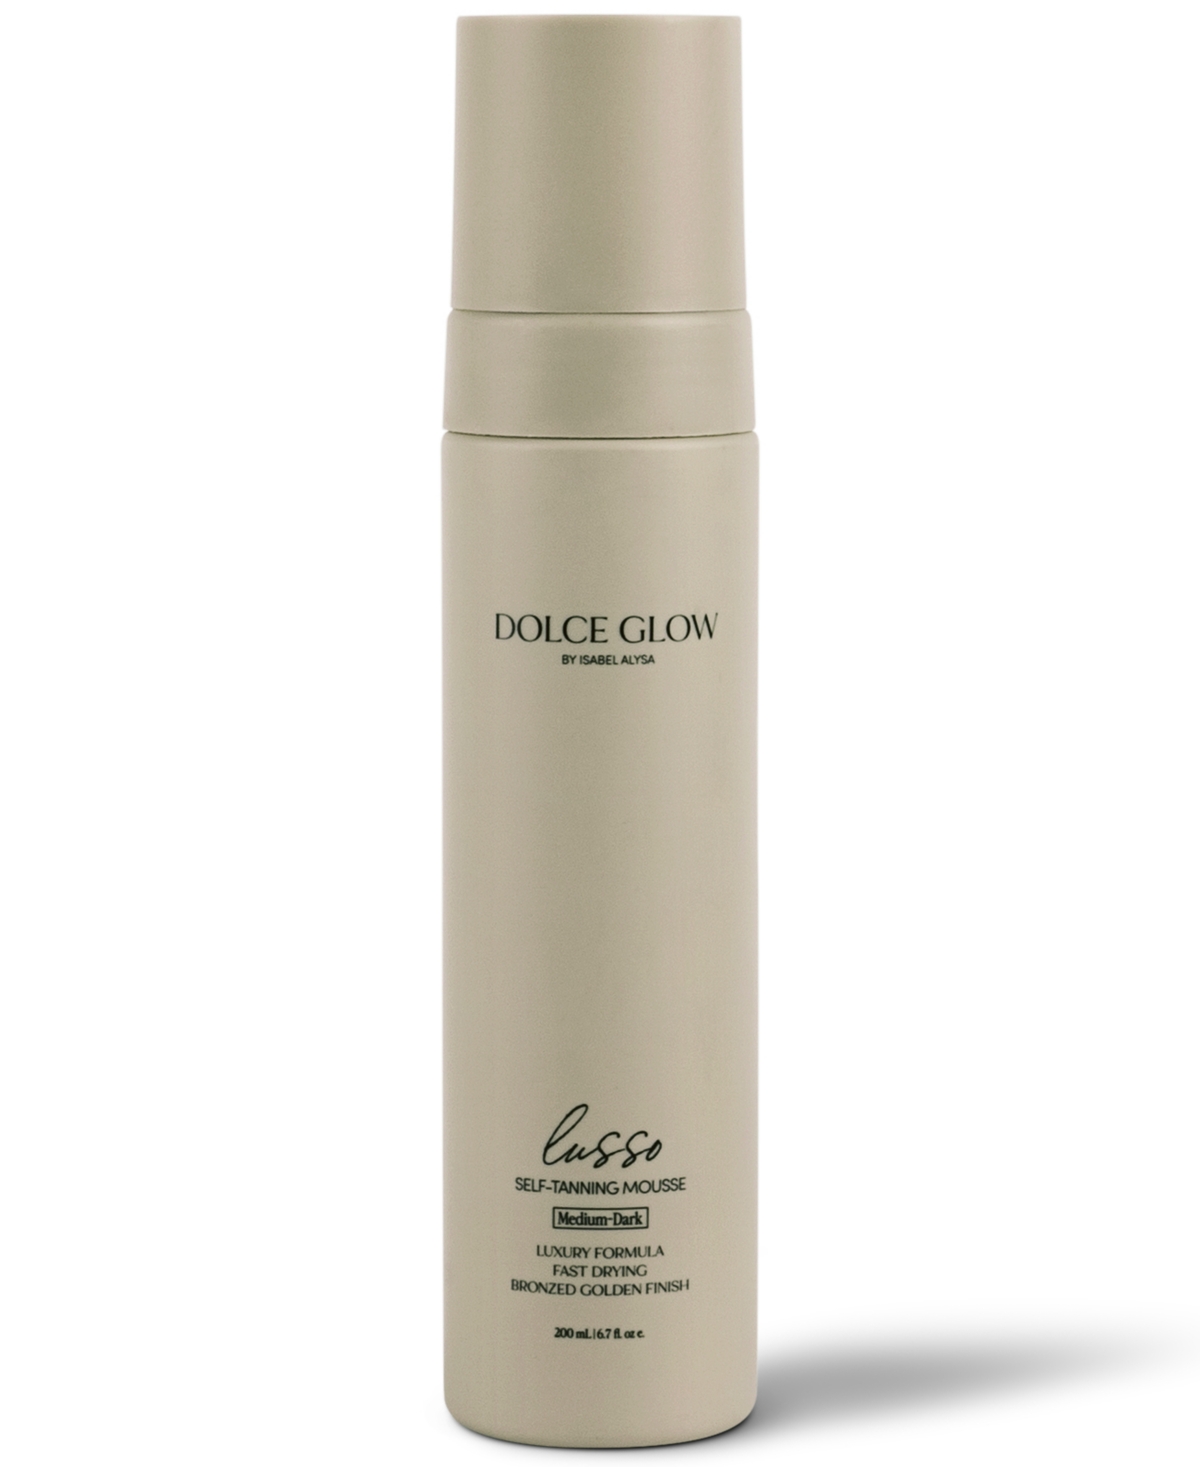 Dolce Glow by Isabel Alysa Lusso Self Tanning Mousse, 6.8 fl. oz.